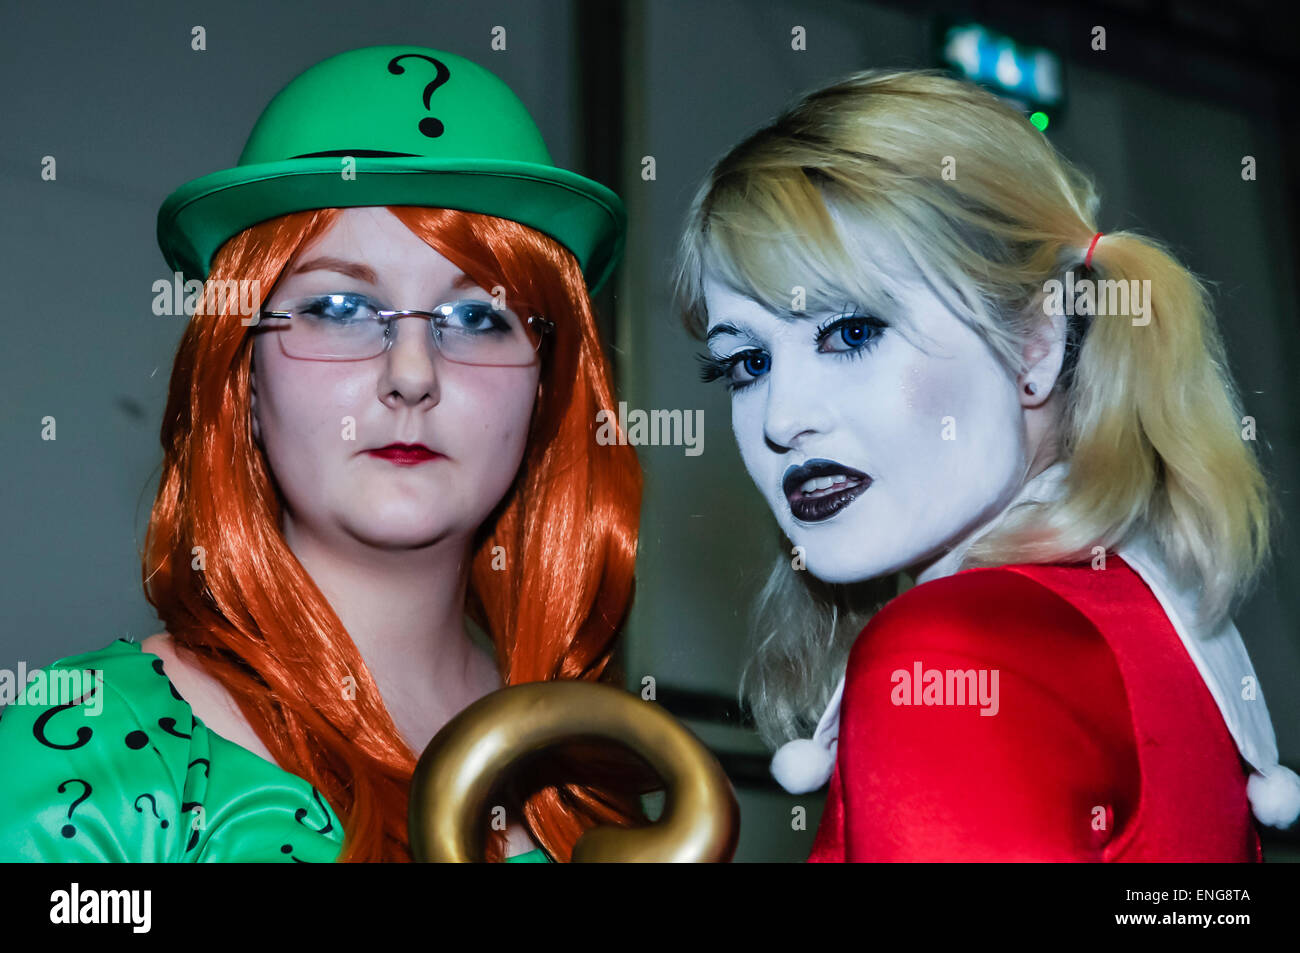 Two cosplayers dressed as the Joker and Harley Quinn from Batman at a Comicon conference Stock Photo